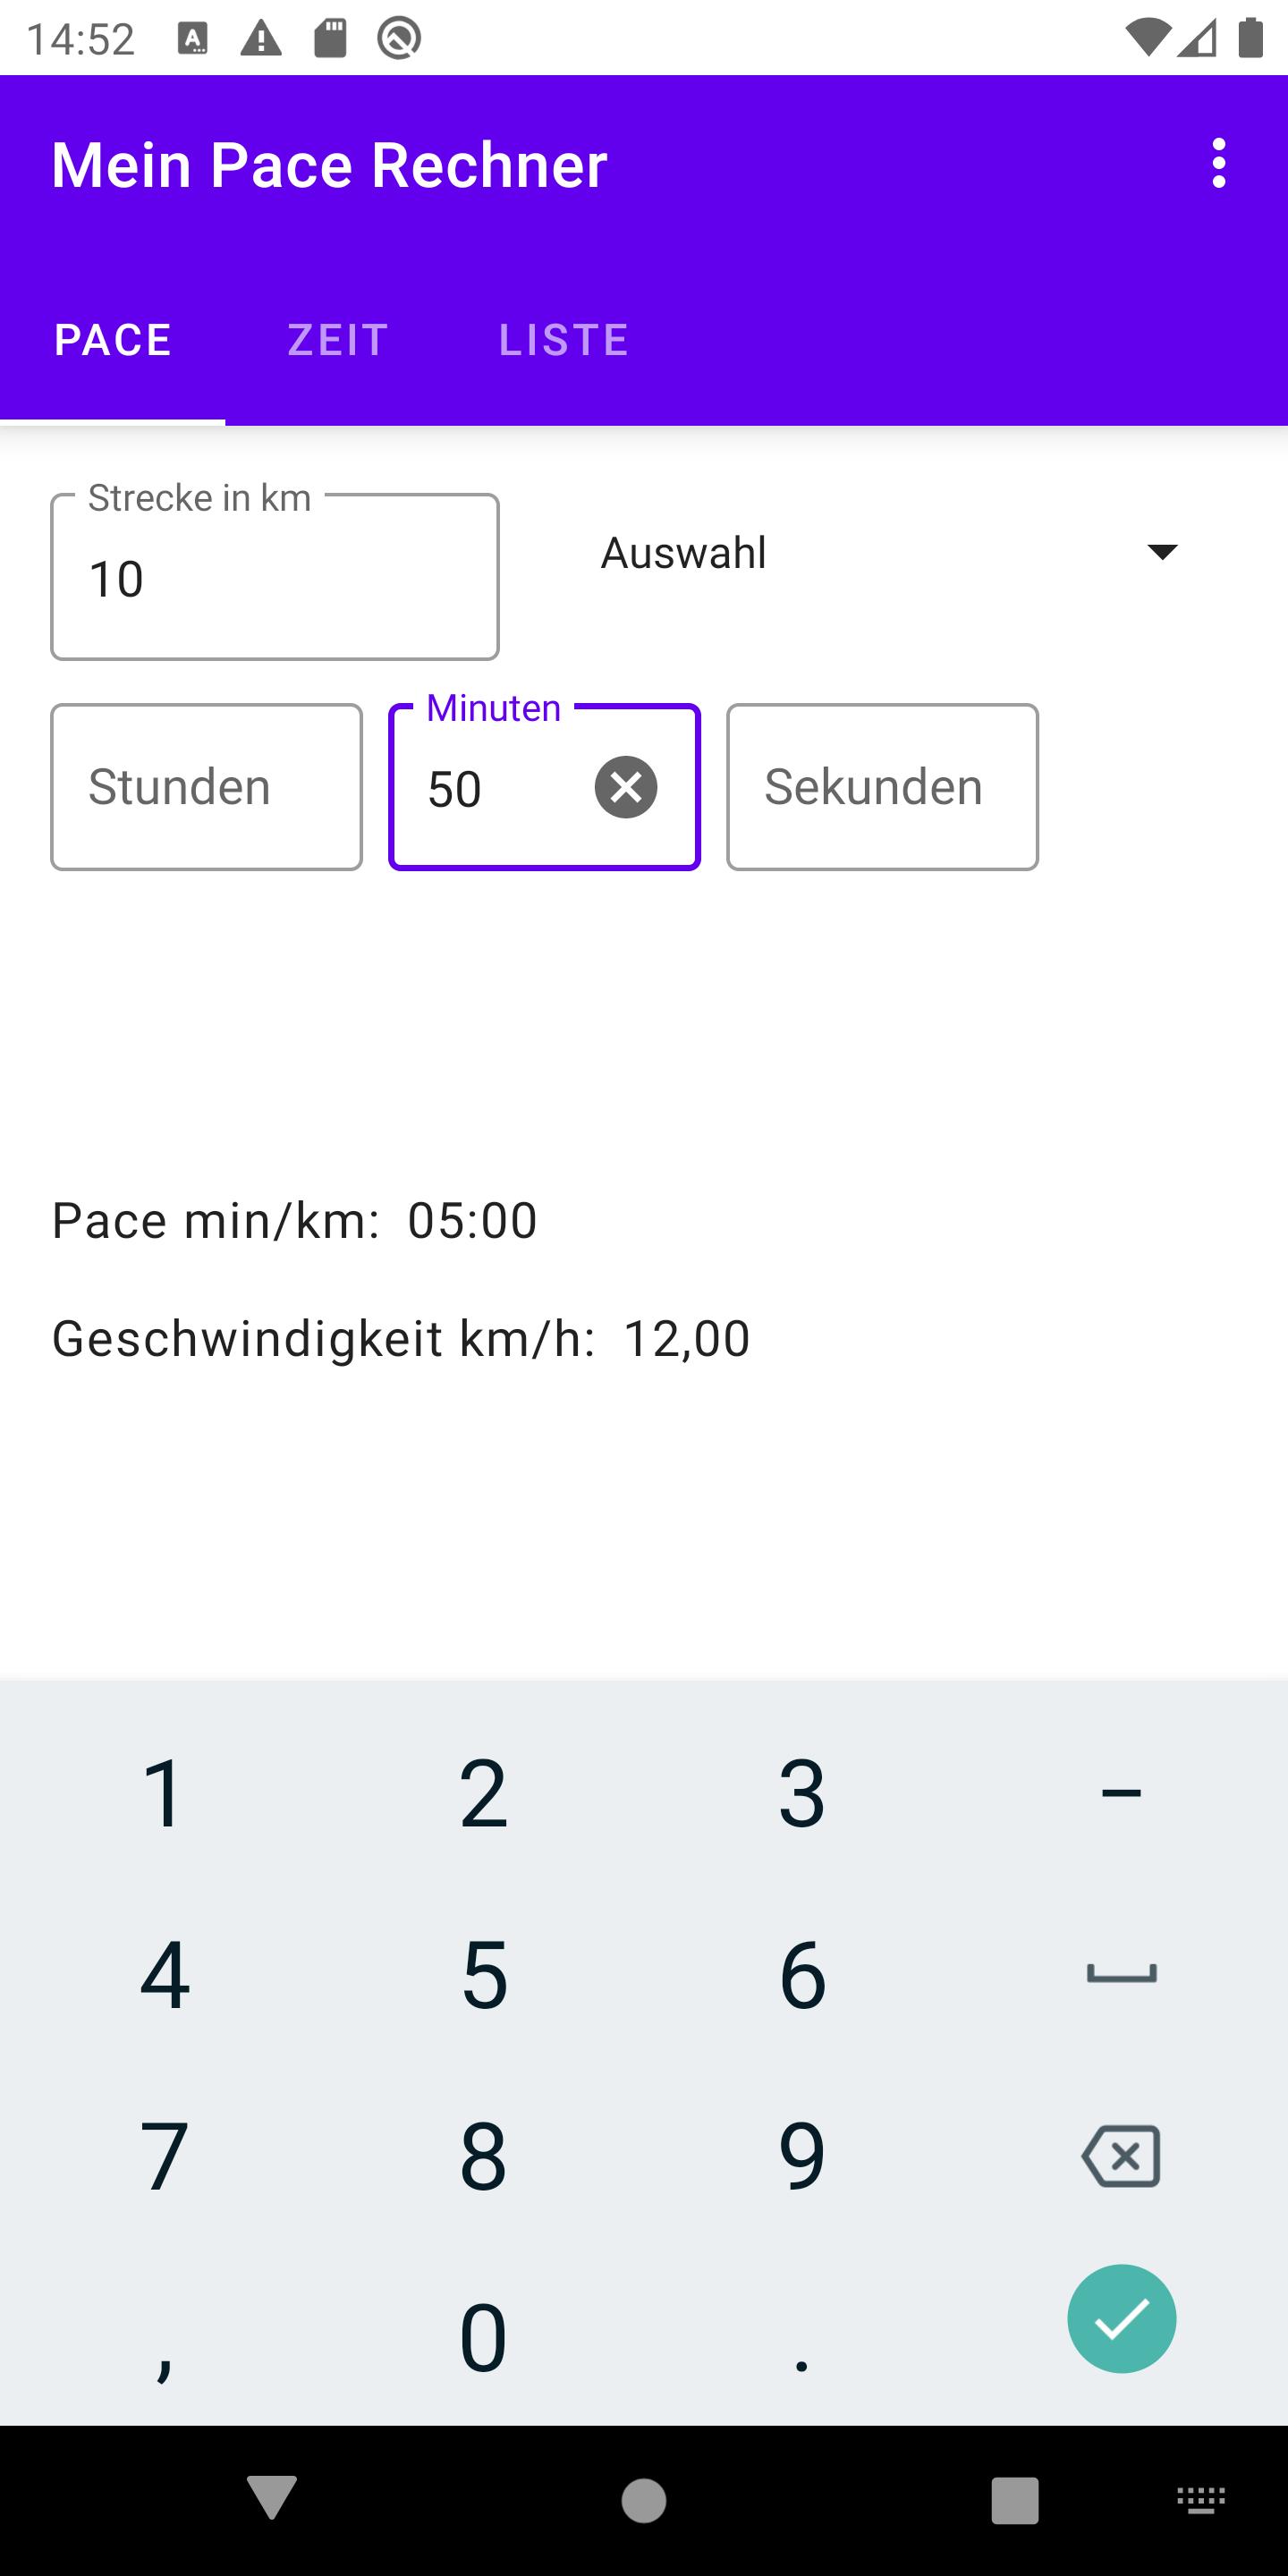 Mein Pace Rechner for Android - APK Download